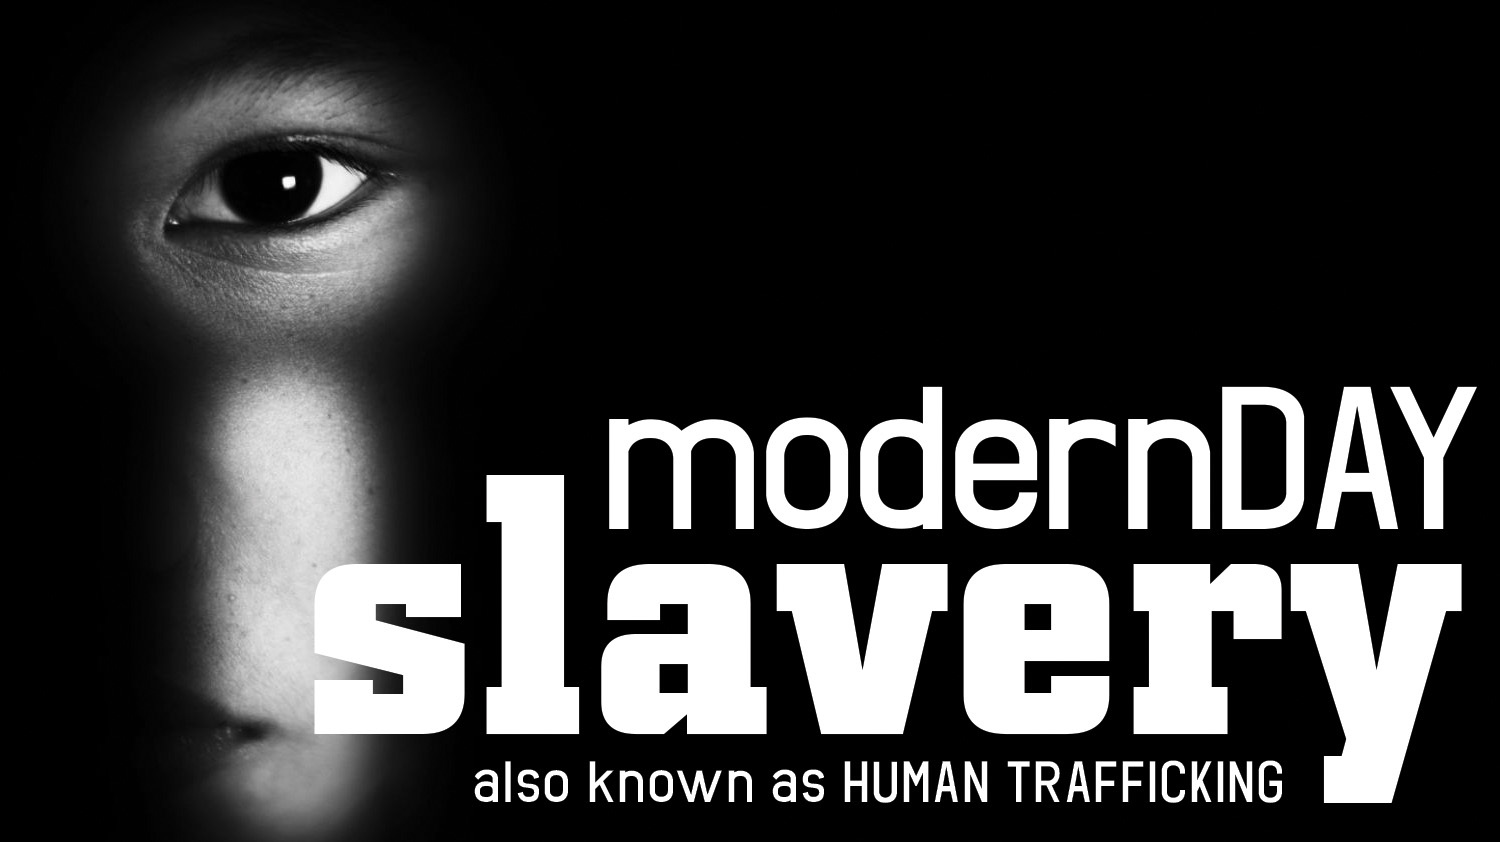 Modern Day Slavery: The Horrors of Human Trafficking :: Ft. Gordon :: US Army MWR